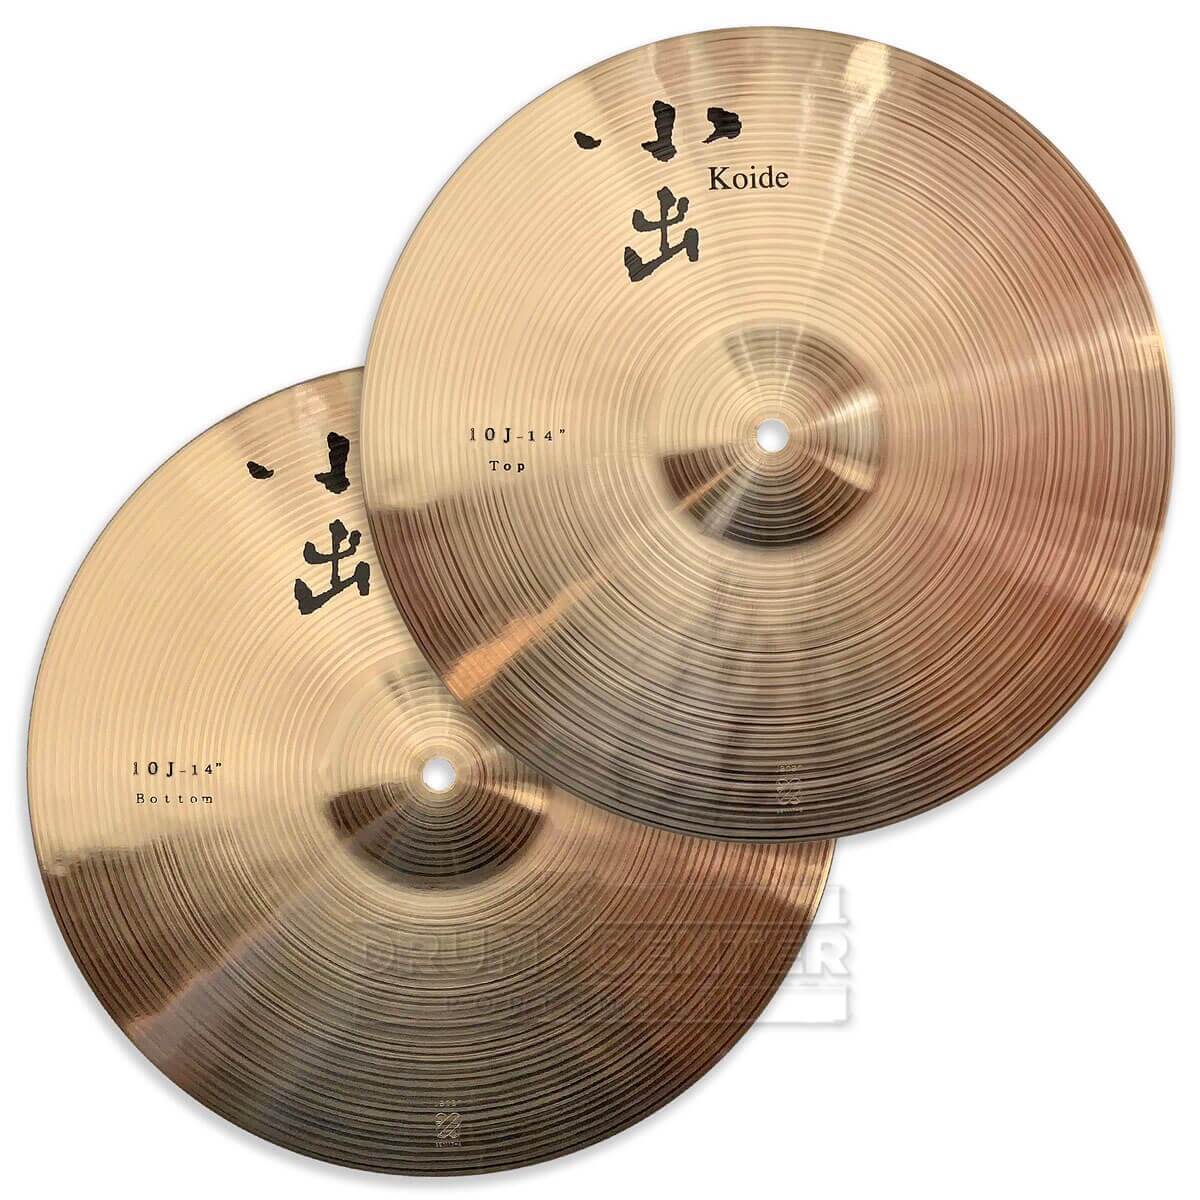 Koide 10J Traditional Hi Hat Cymbals 14" 1 grams - Drum Center Of Portsmouth